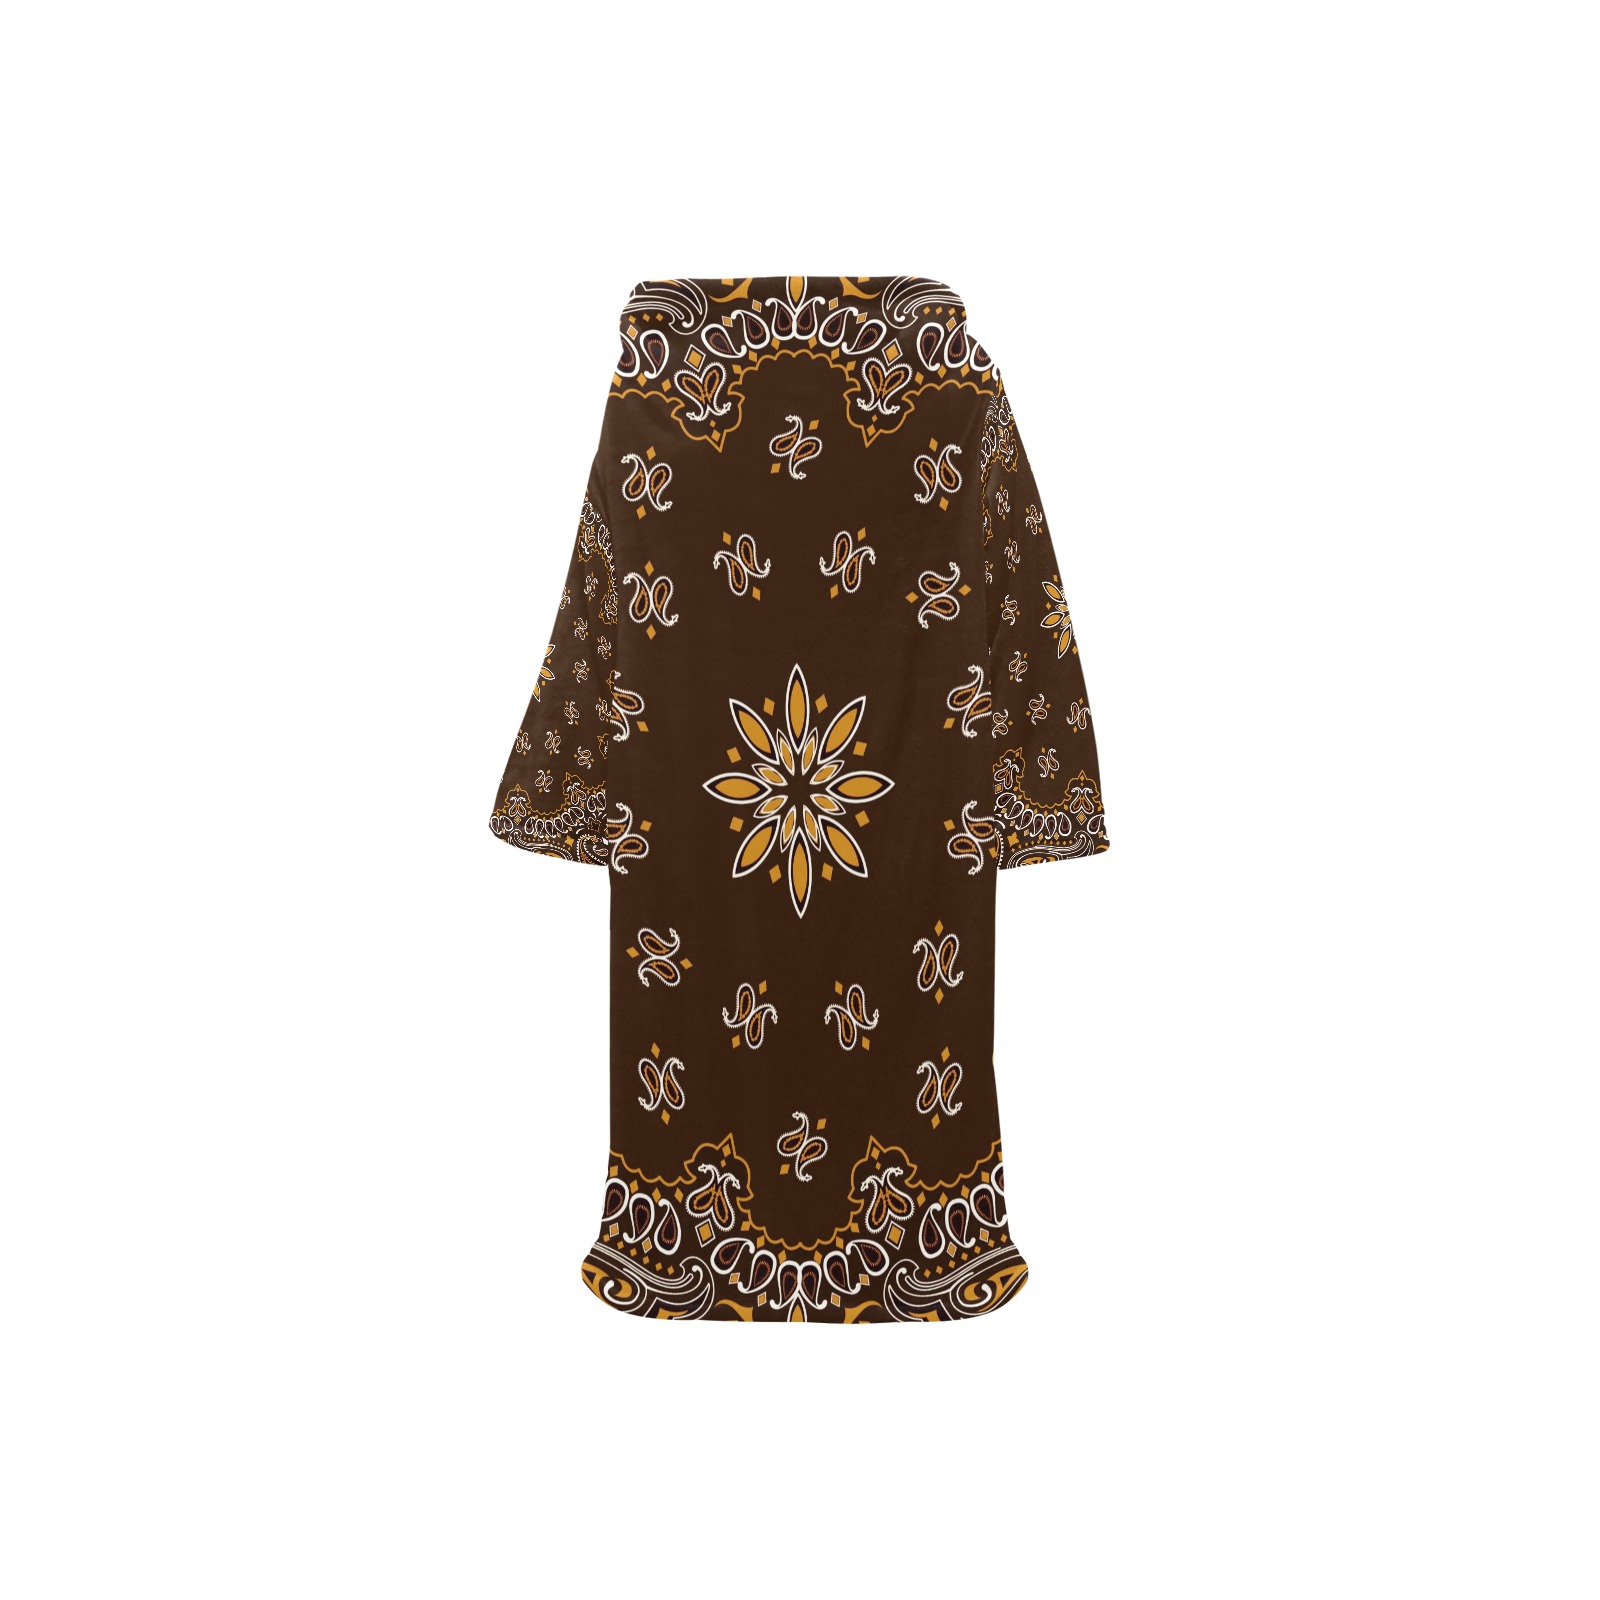 Brown Bandanna Pattern Blanket Robe with Sleeves for Kids